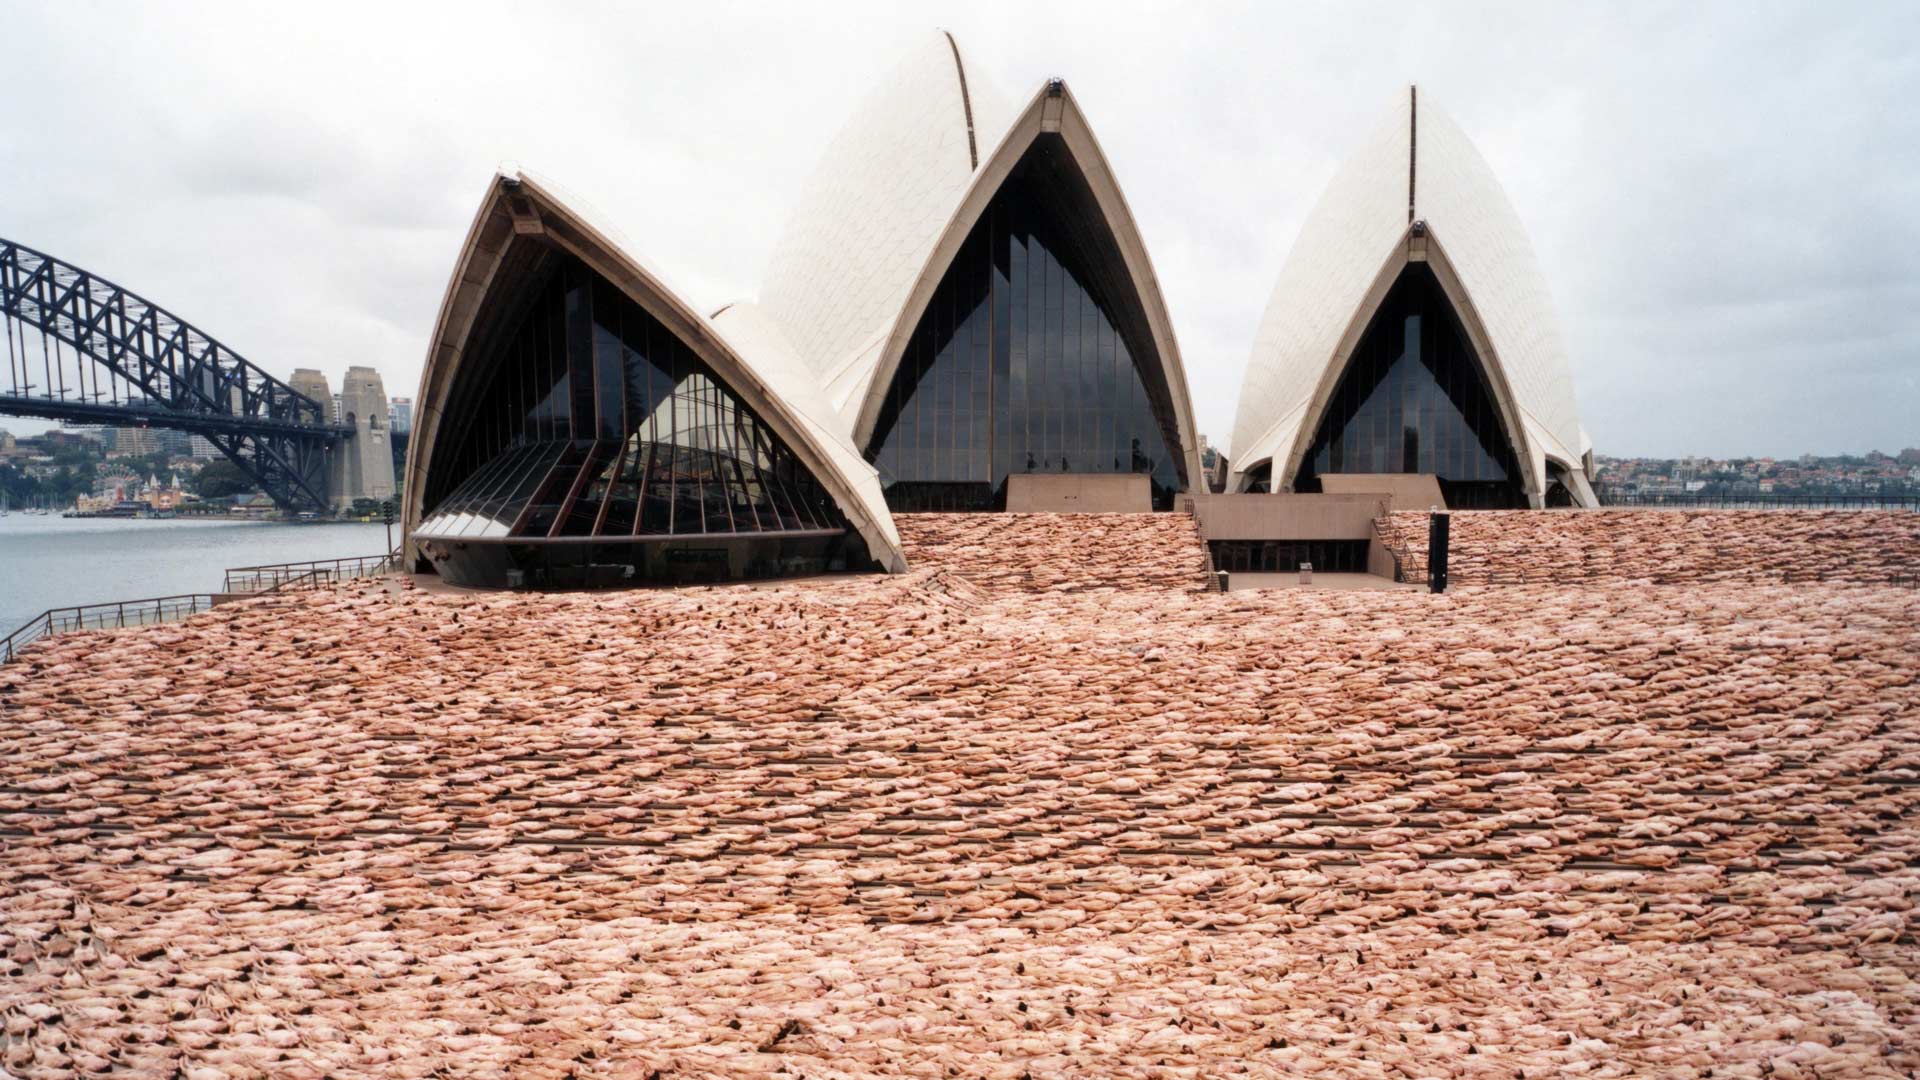 Artist Spencer Tunick Will Stage a Mass Nude Work on a Melbourne Rooftop After All